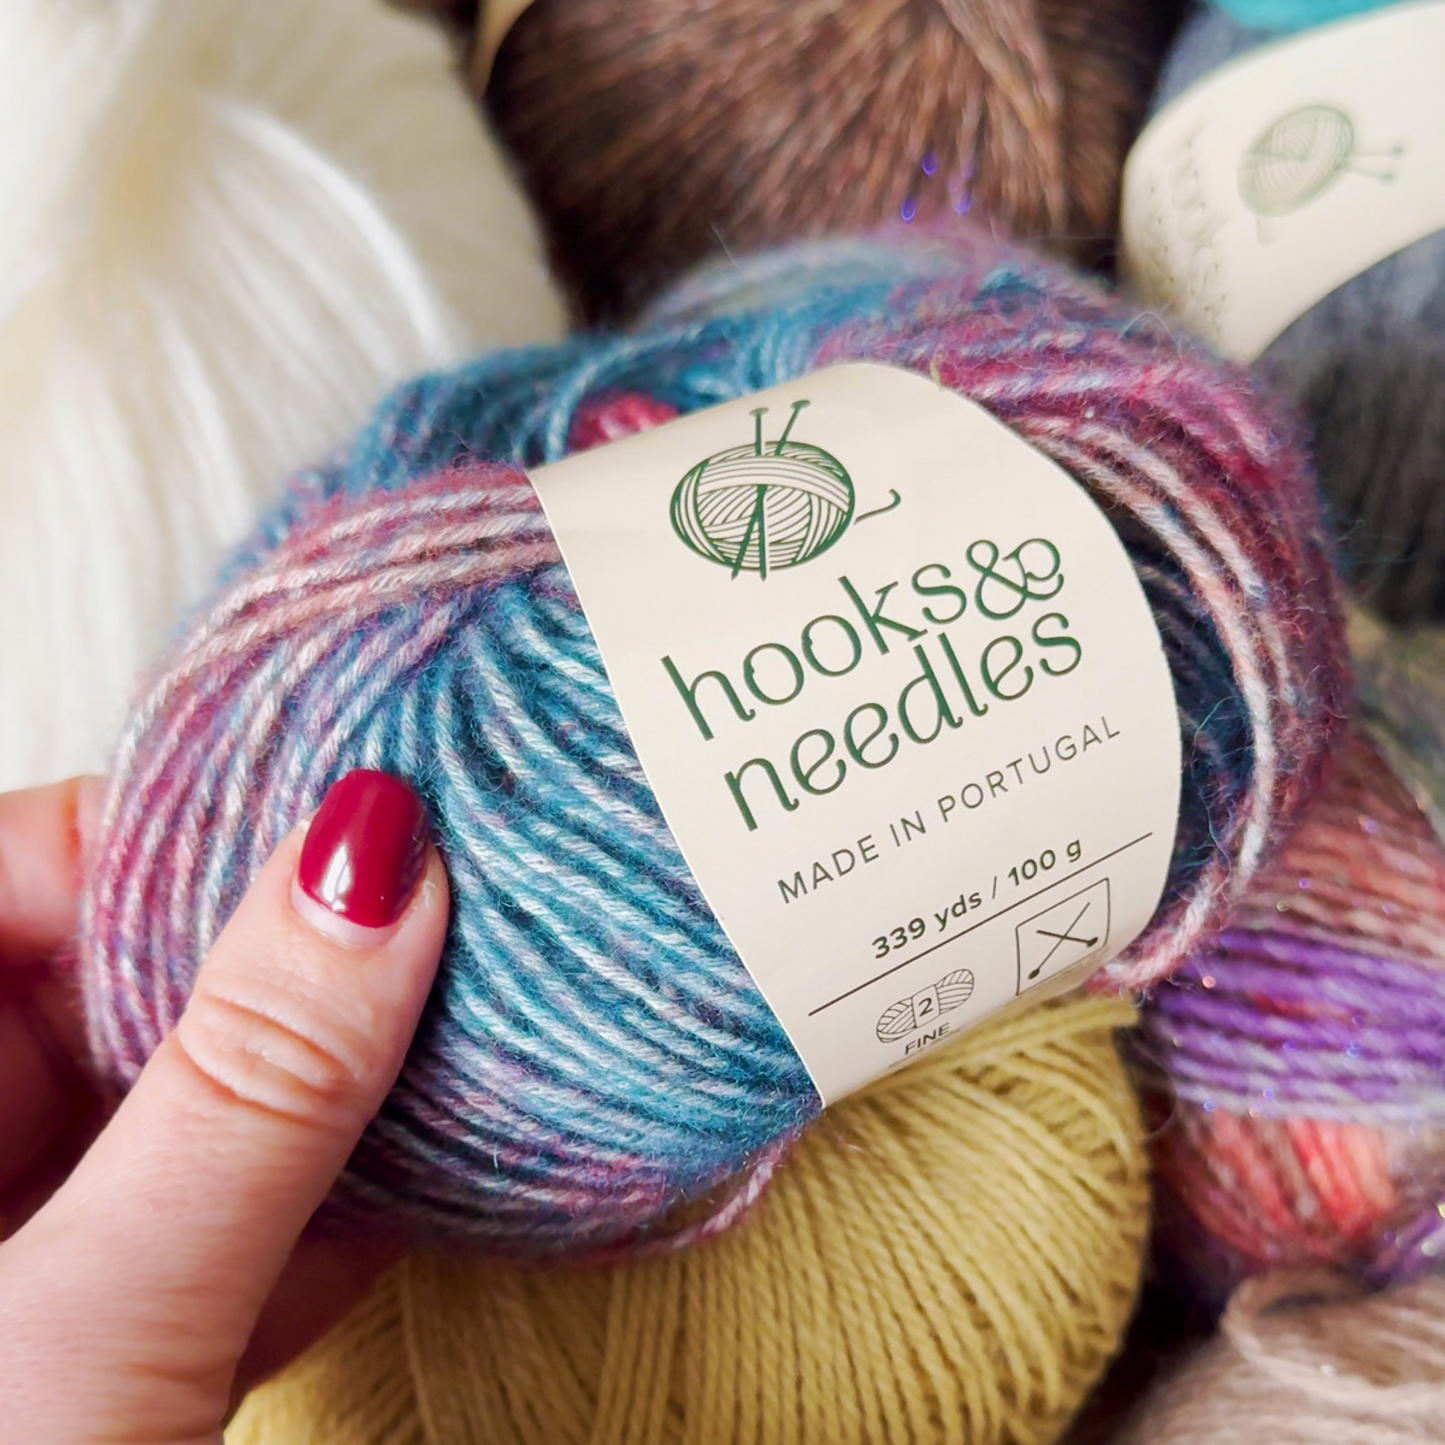 A close-up of a hand holding a skein of multicolored yarn from the [3-Month-Prepaid] Hooks & Needles Subscription Box #7, labeled "hooks & needles, made in Portugal," among other yarn skeins.